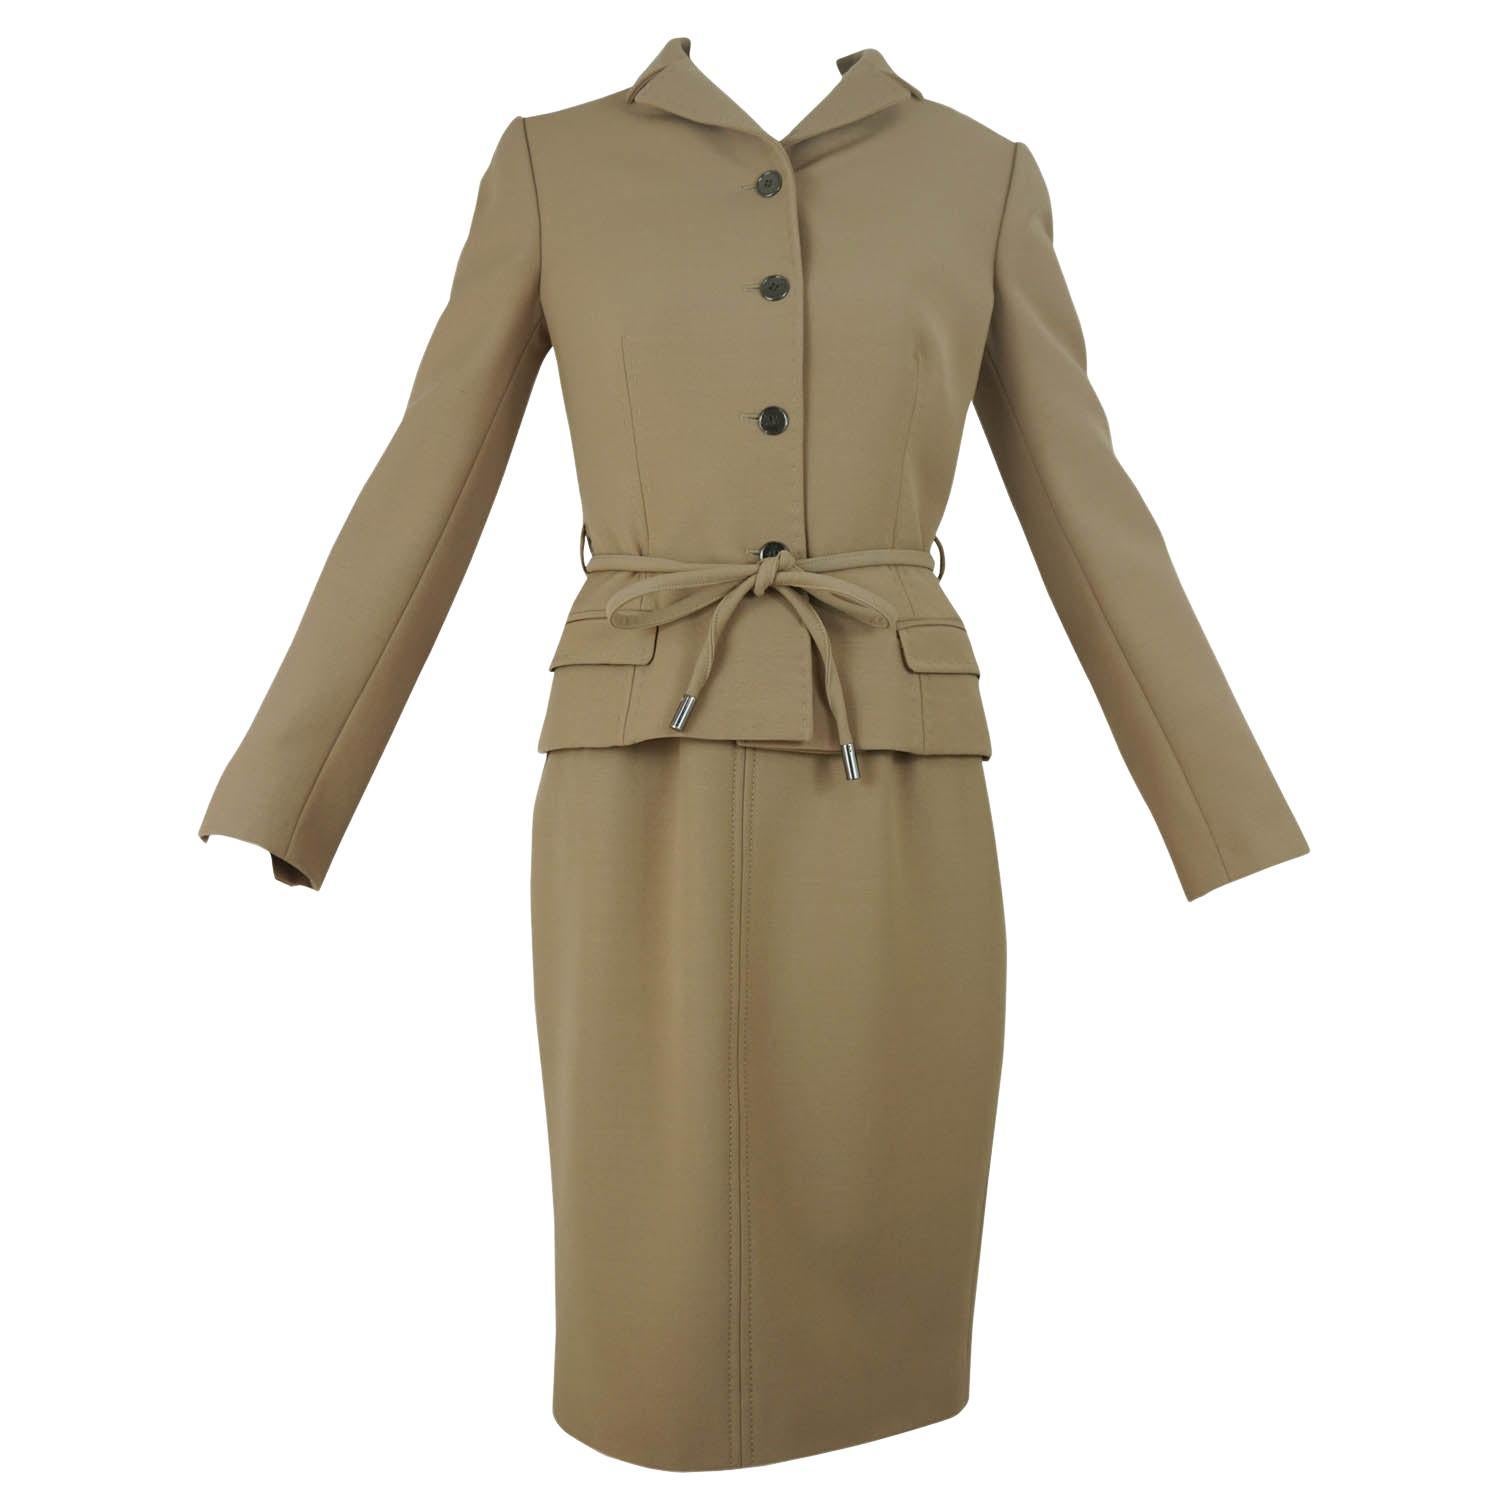 Dolce & Gabbana Dress and Belted Jacket Sz 42/6 For Sale